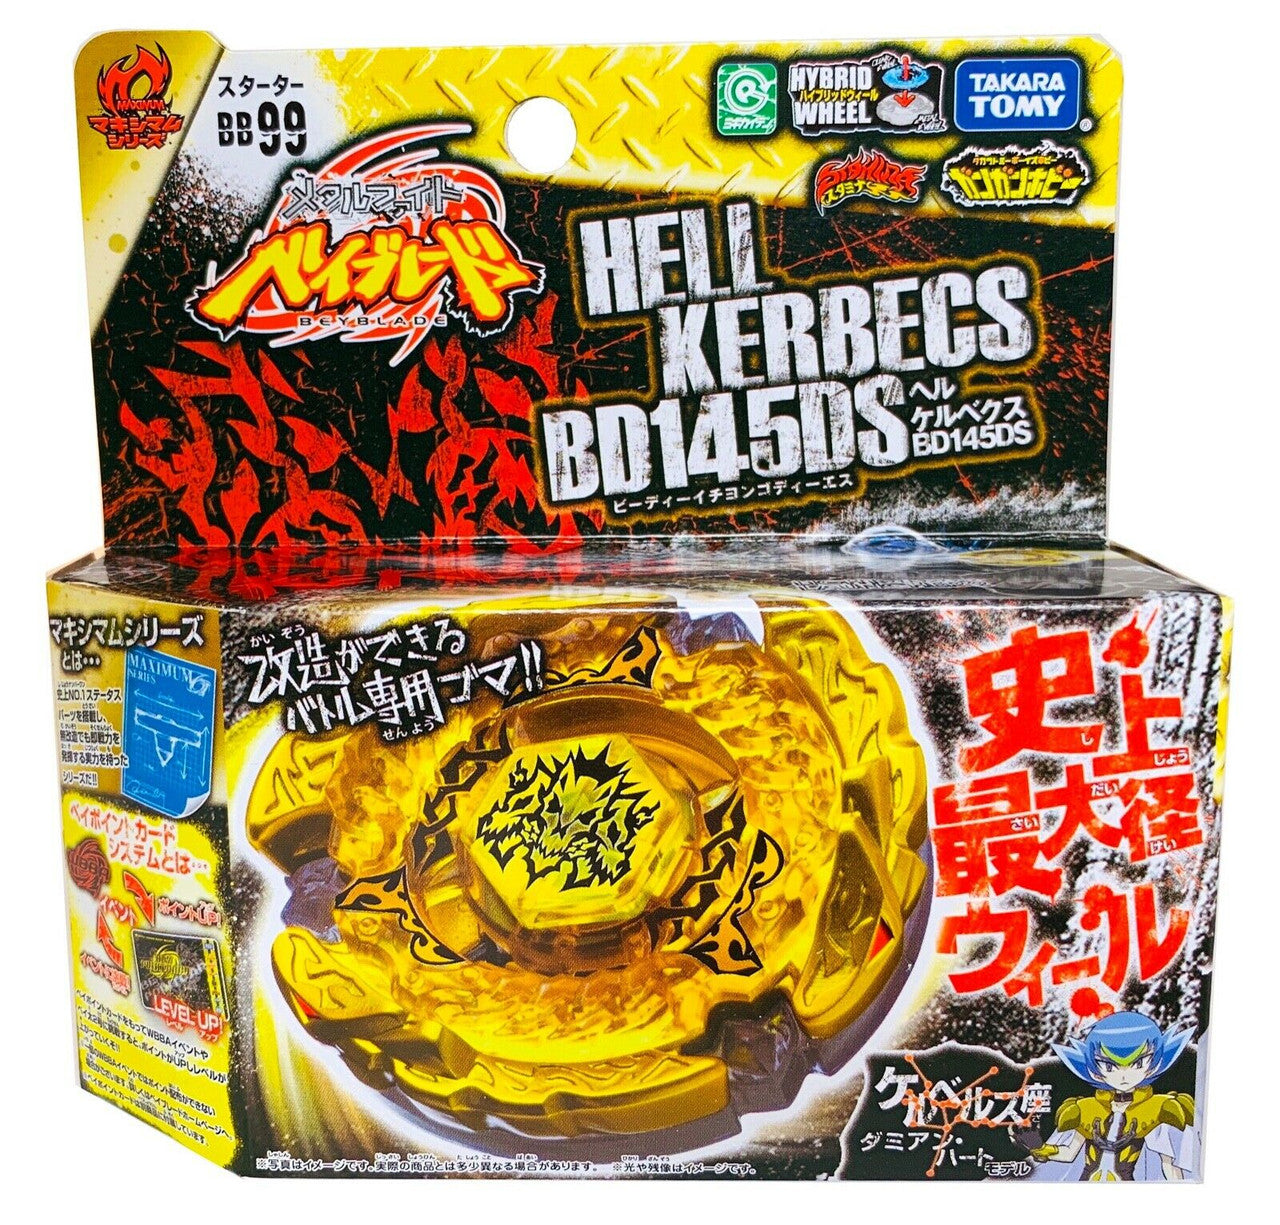 Hell / Hades Kerbecs BD145DS Metal Masters Beyblade Starter BB-99